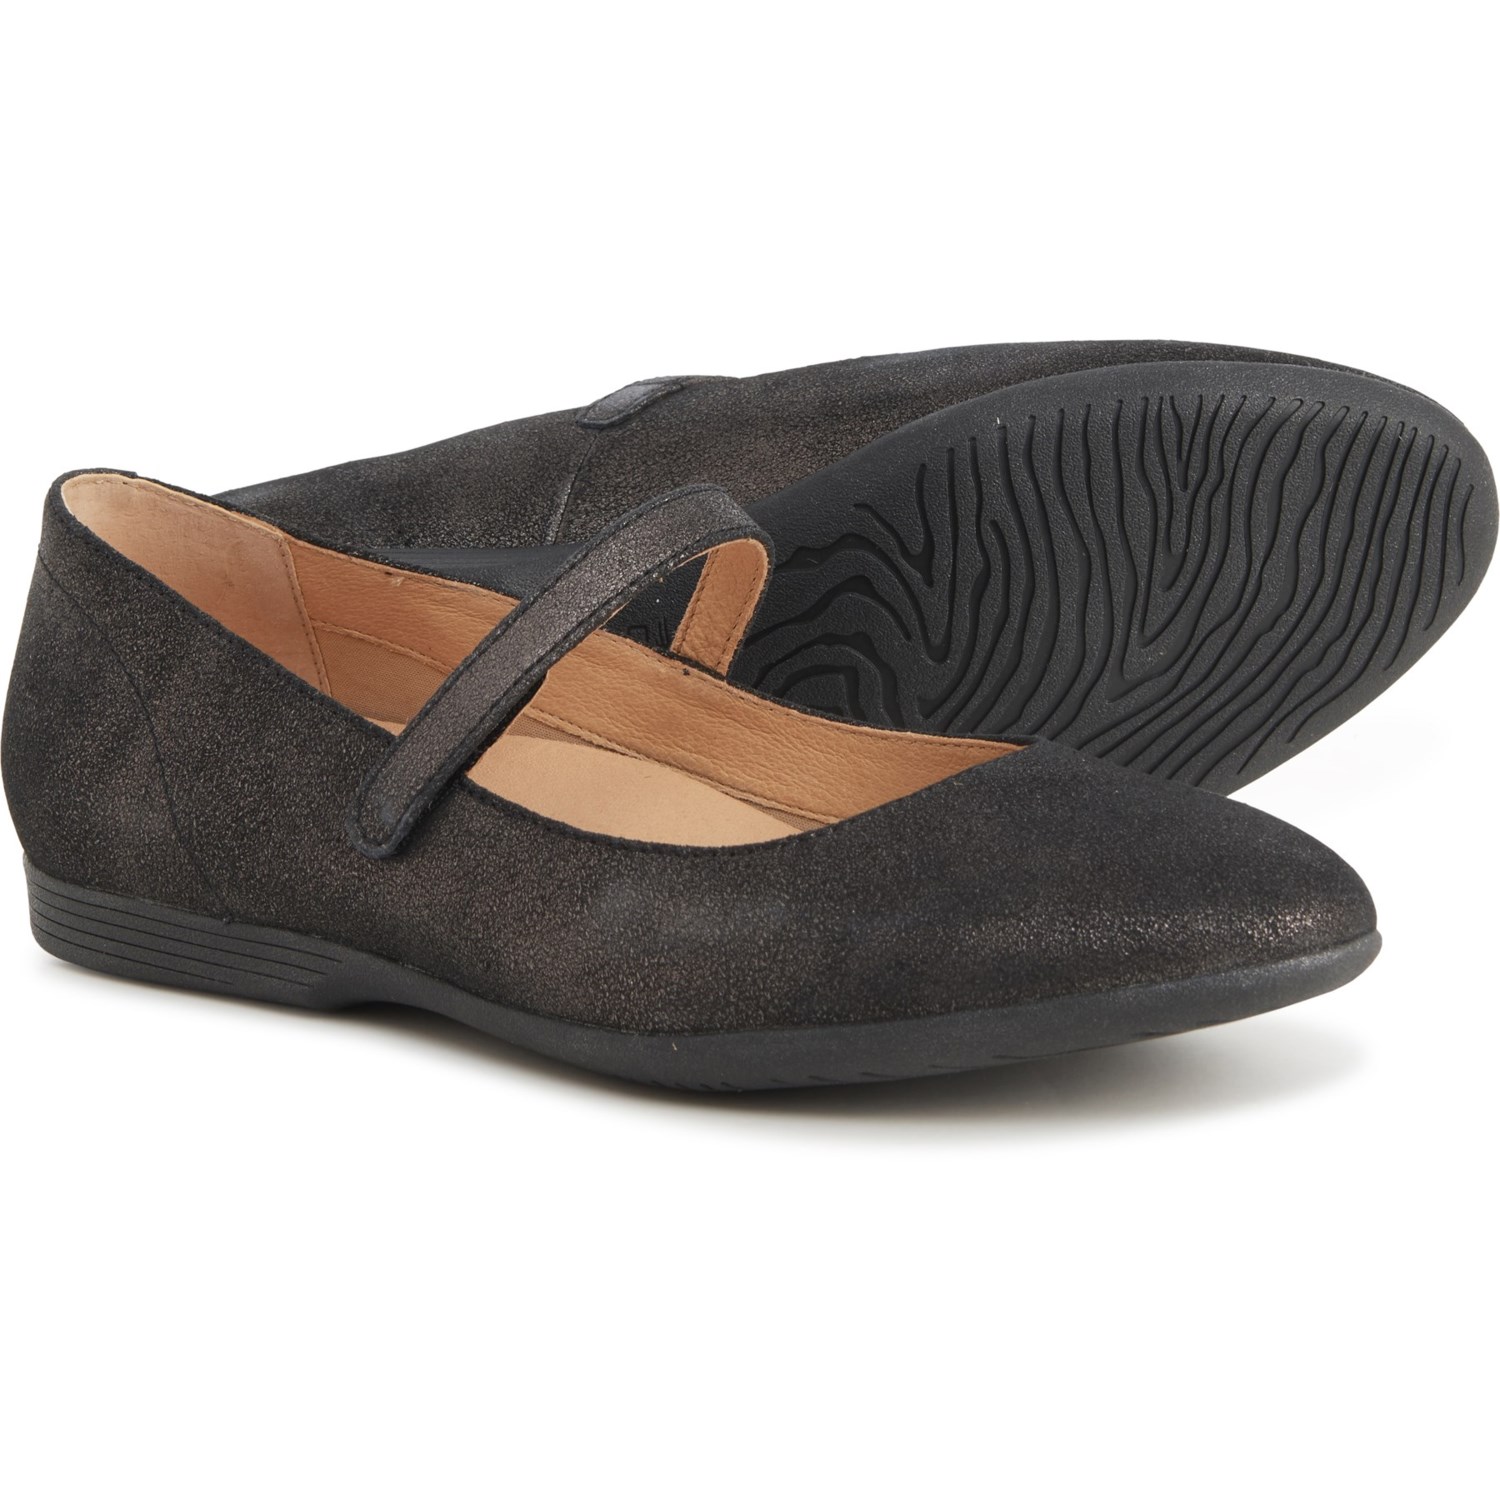 Dansko Lilly Mary Jane Shoes (For Women) - Save 49%